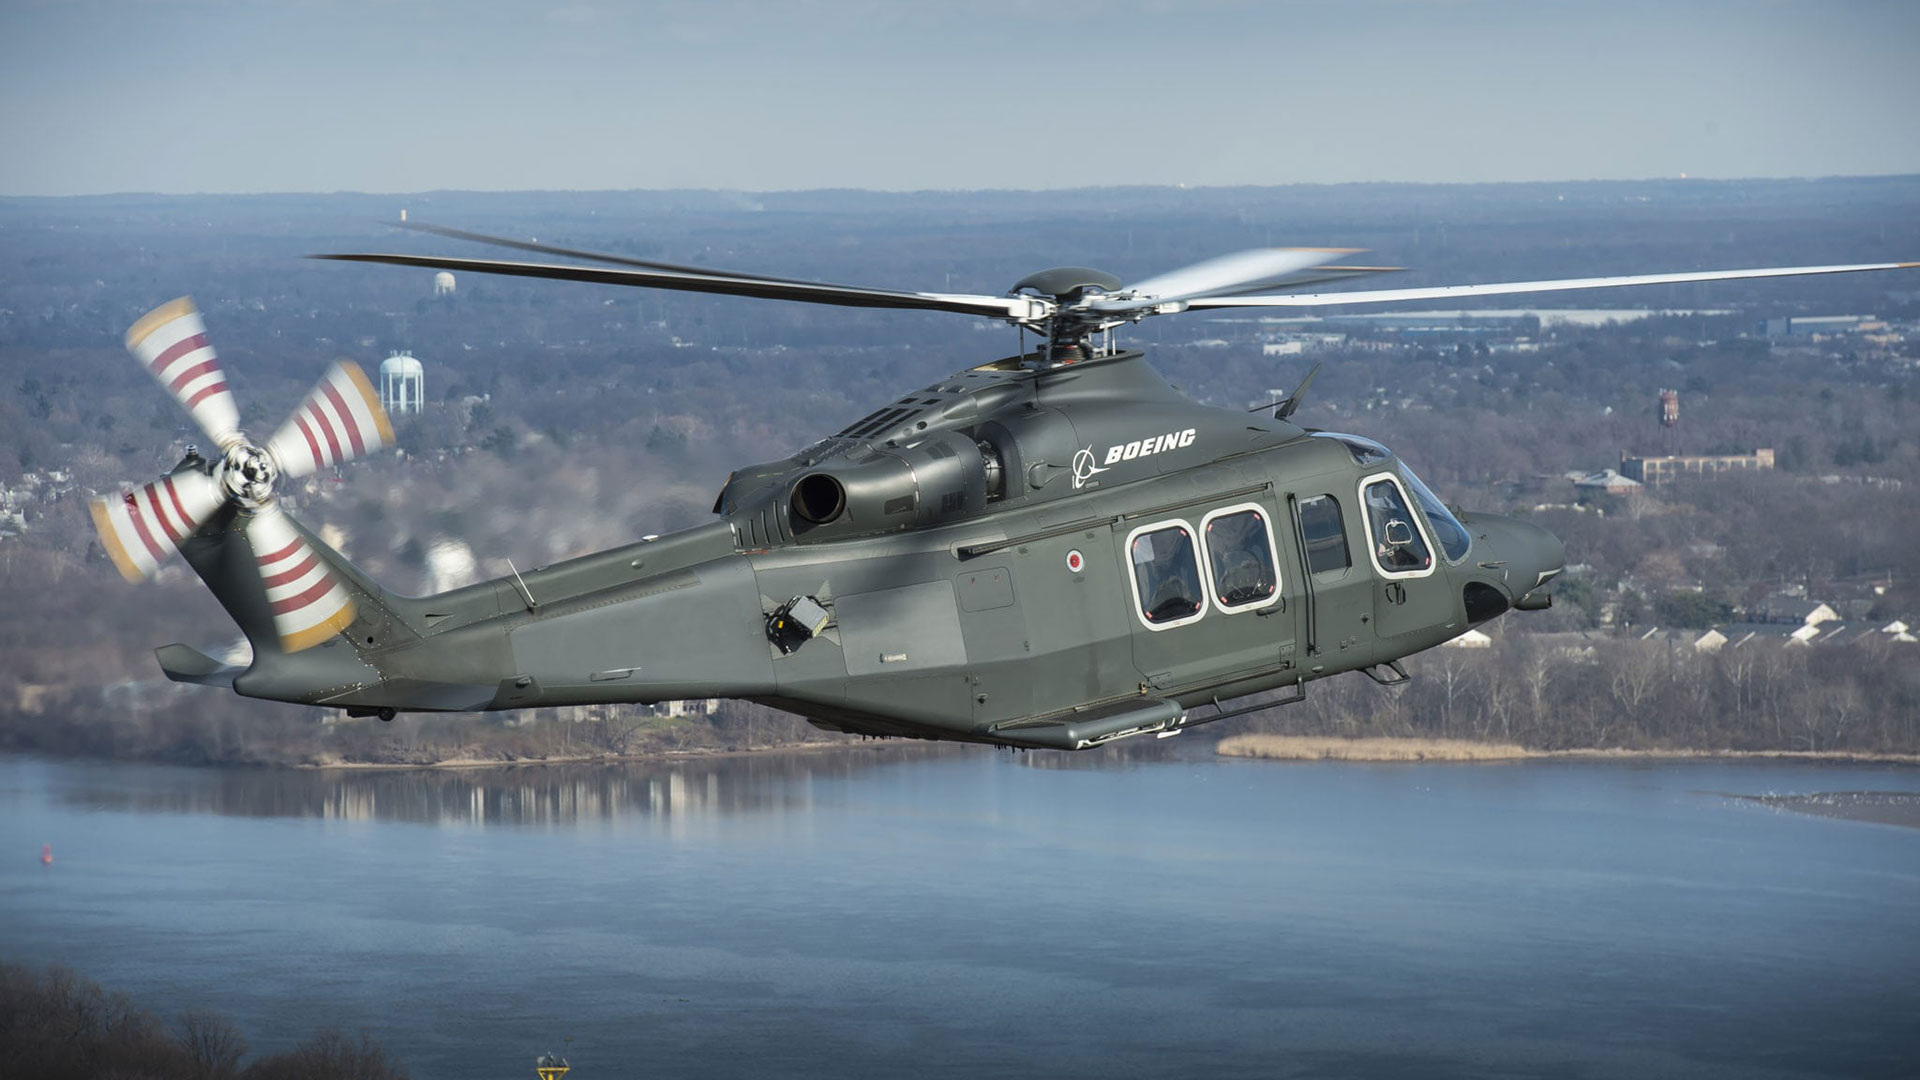 BOEING LAUNCHES PROVEN, AFFORDABLE MH-139 IN U.S. AIR FORCE HELICOPTER COMPETITION